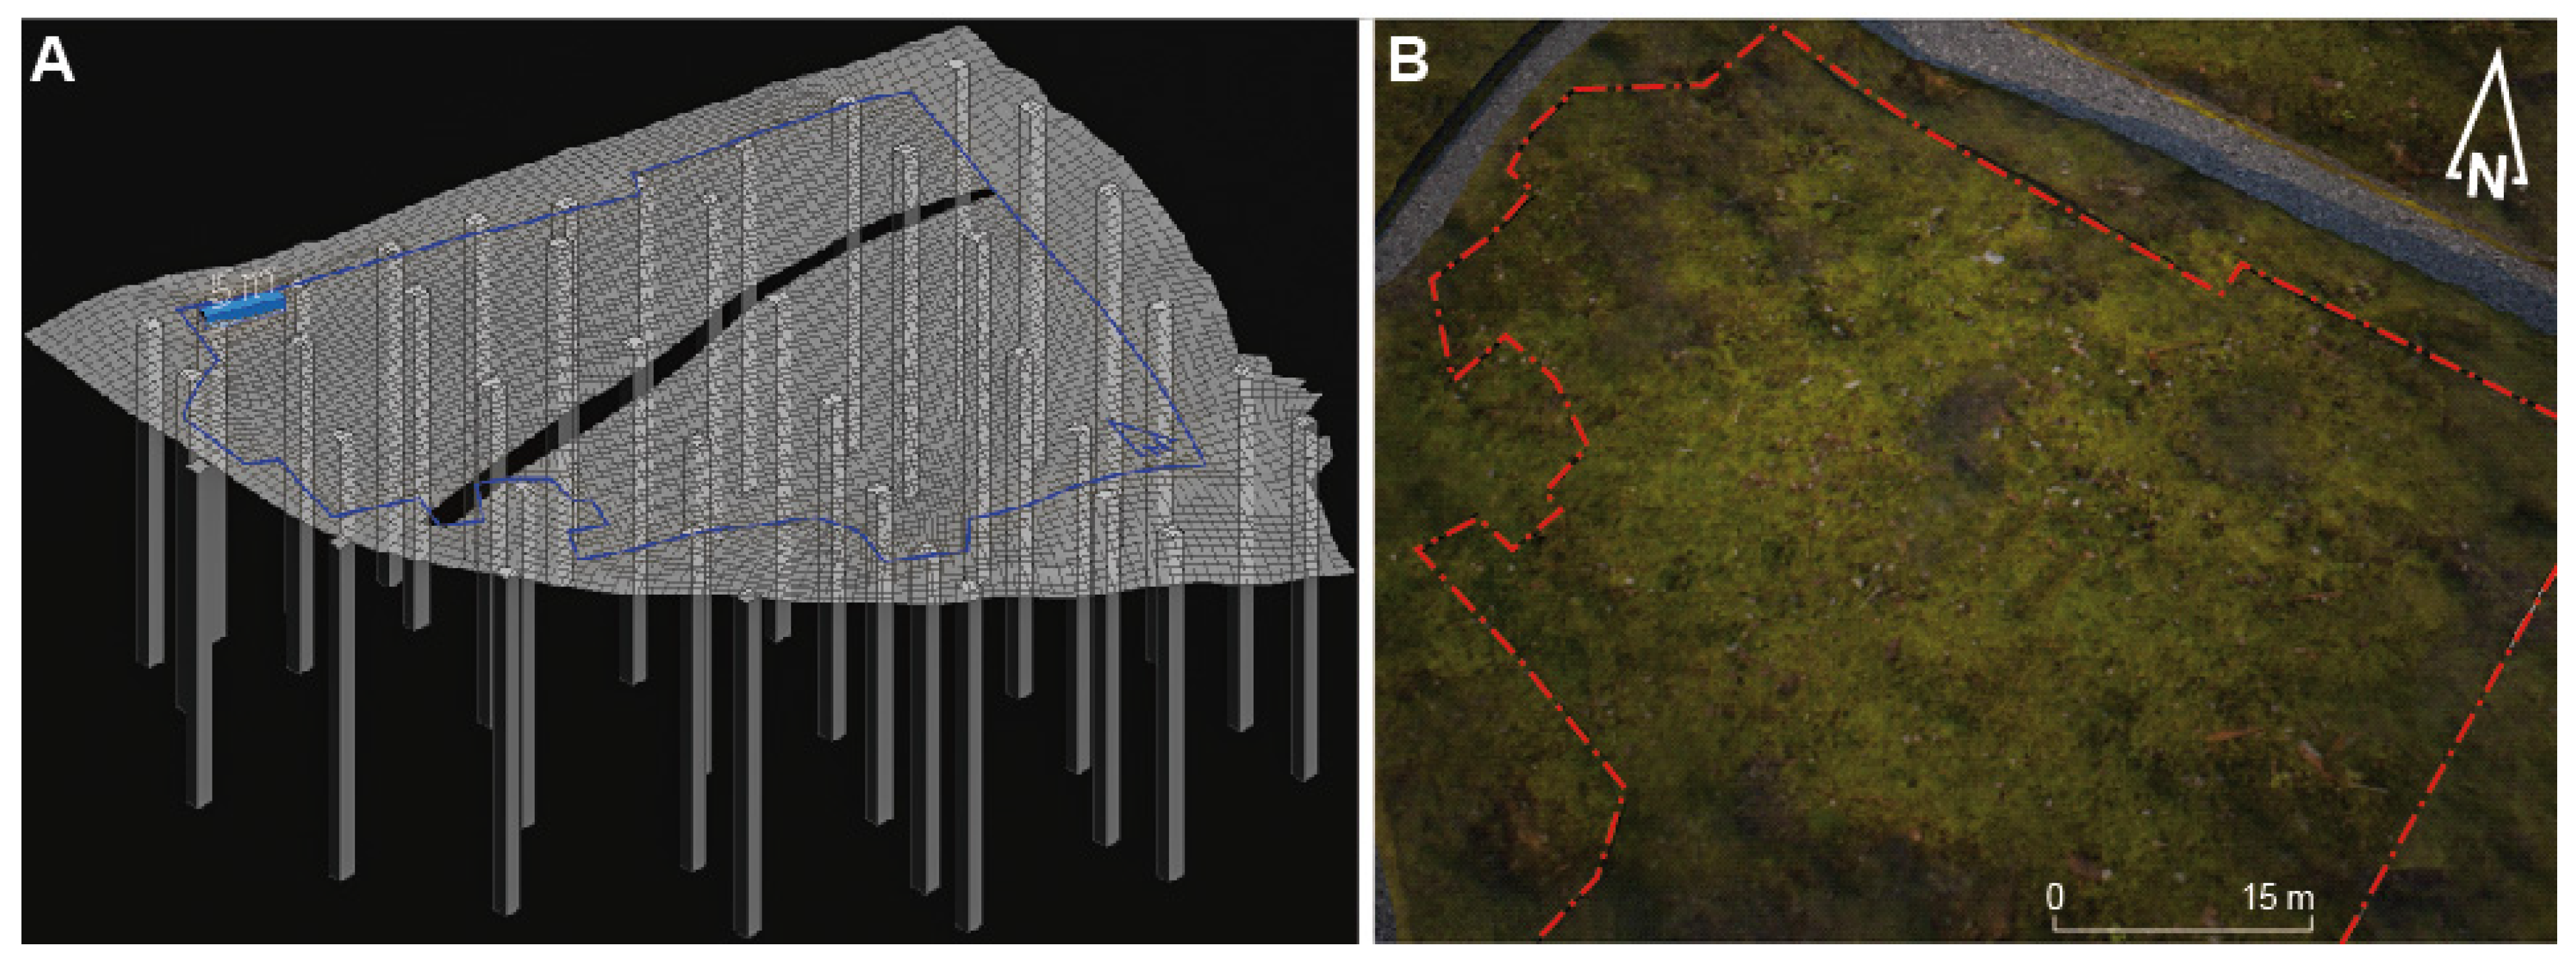 Remote Sensing | Free Full-Text | 3D Reconstruction and Geostatic Analysis  of an Early Medieval Cemetery (Olonne-sur-Mer, France) | HTML